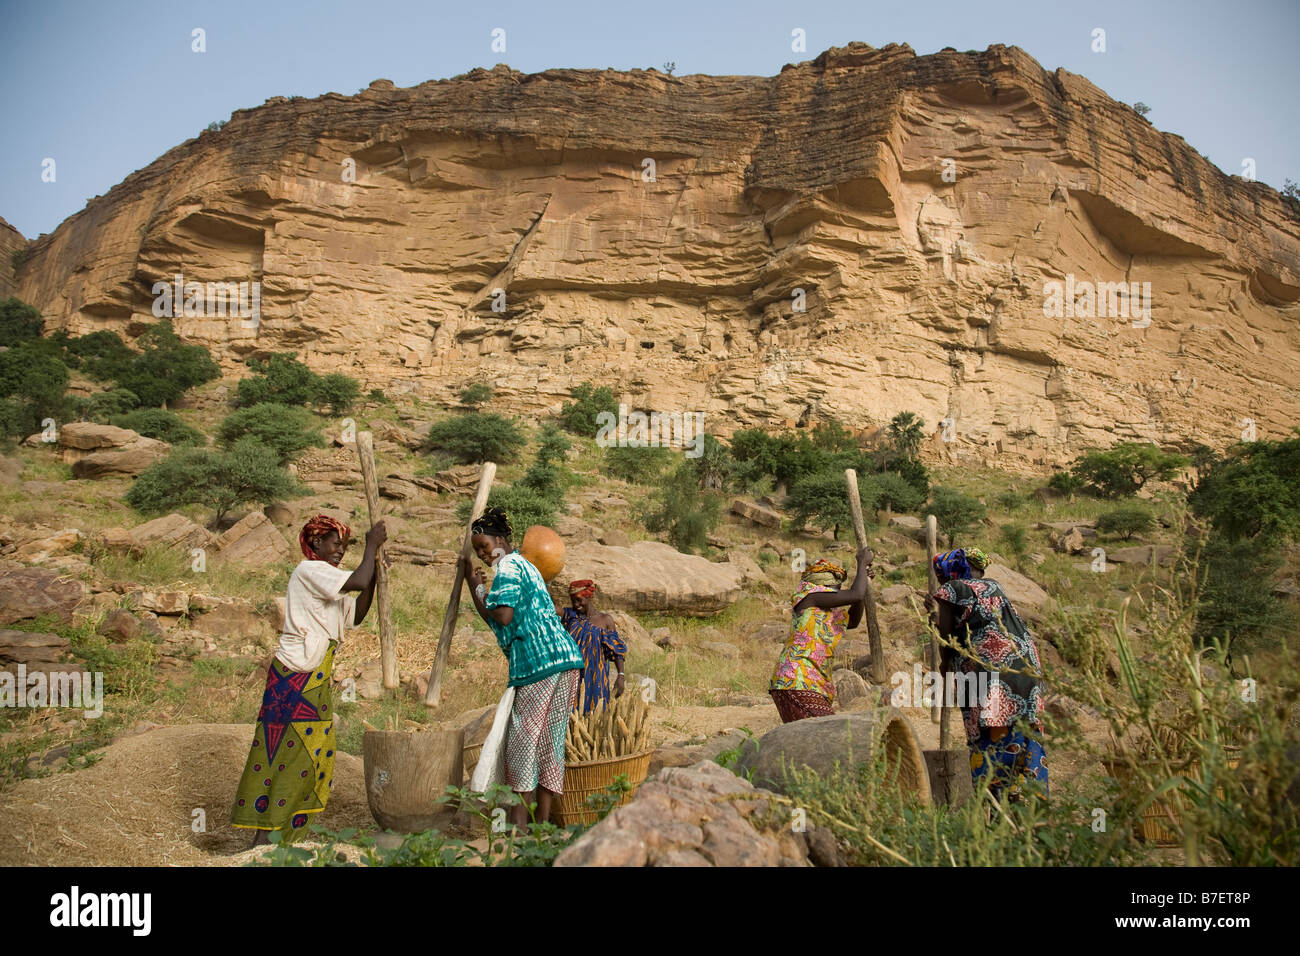 Pounding millet in the Dogon Valley Stock Photo